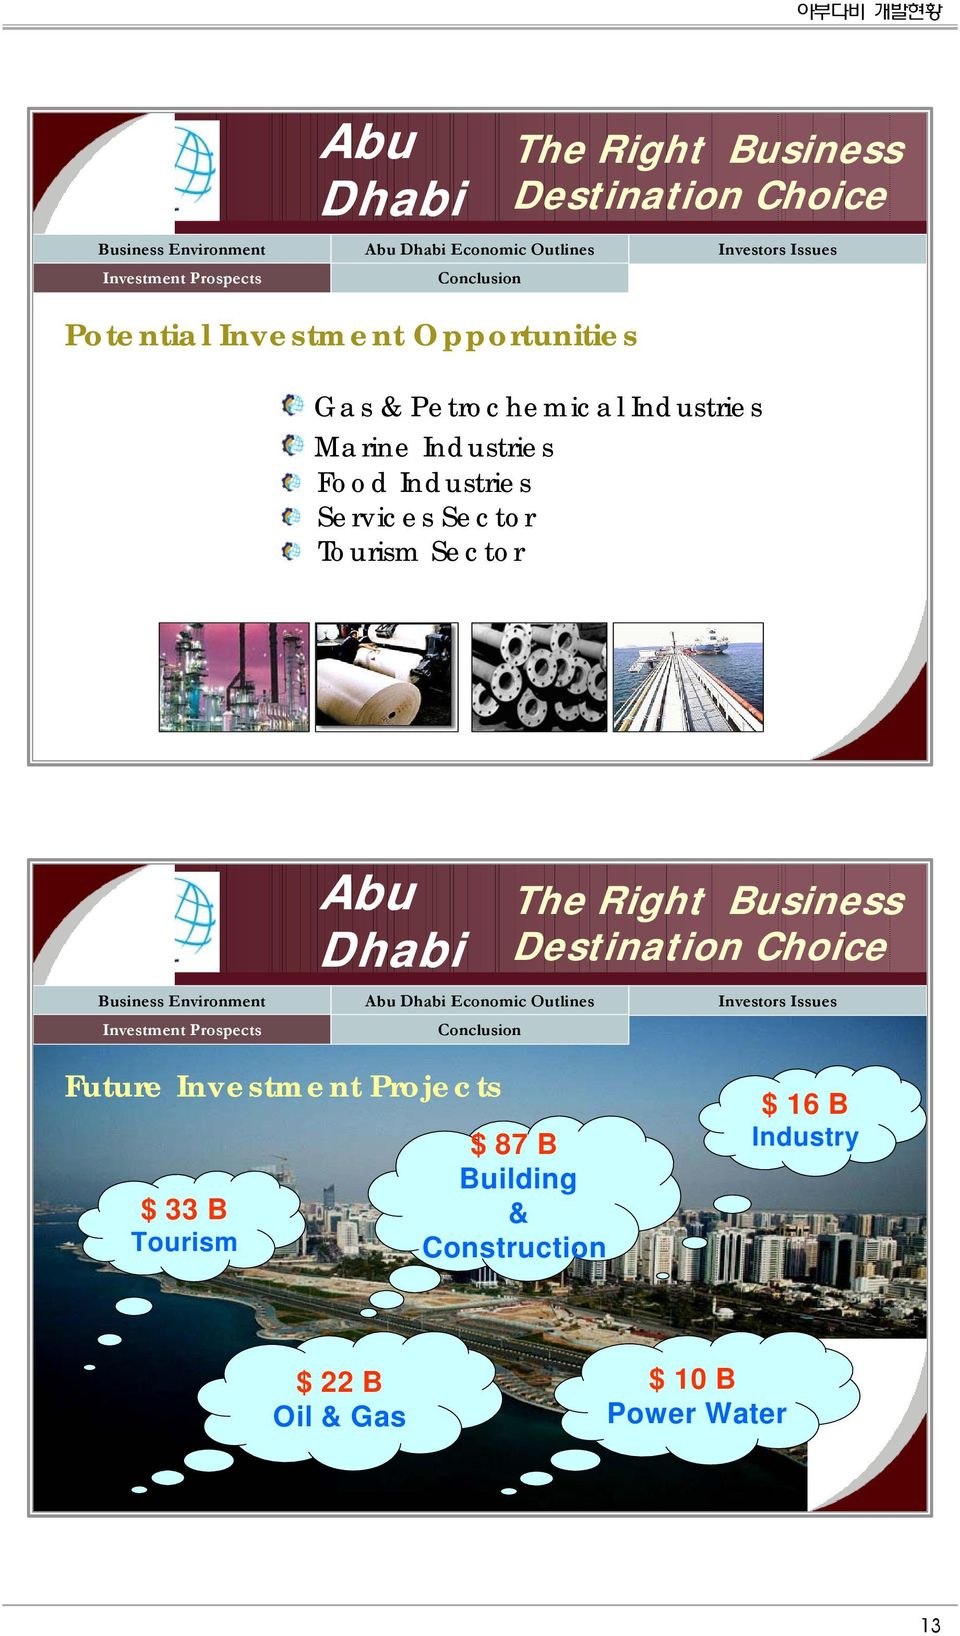 Tourism Sector Abu Dhabi The Right Business Destination Choice Business Environment Abu Dhabi Economic Outlines Investors Issues Investment